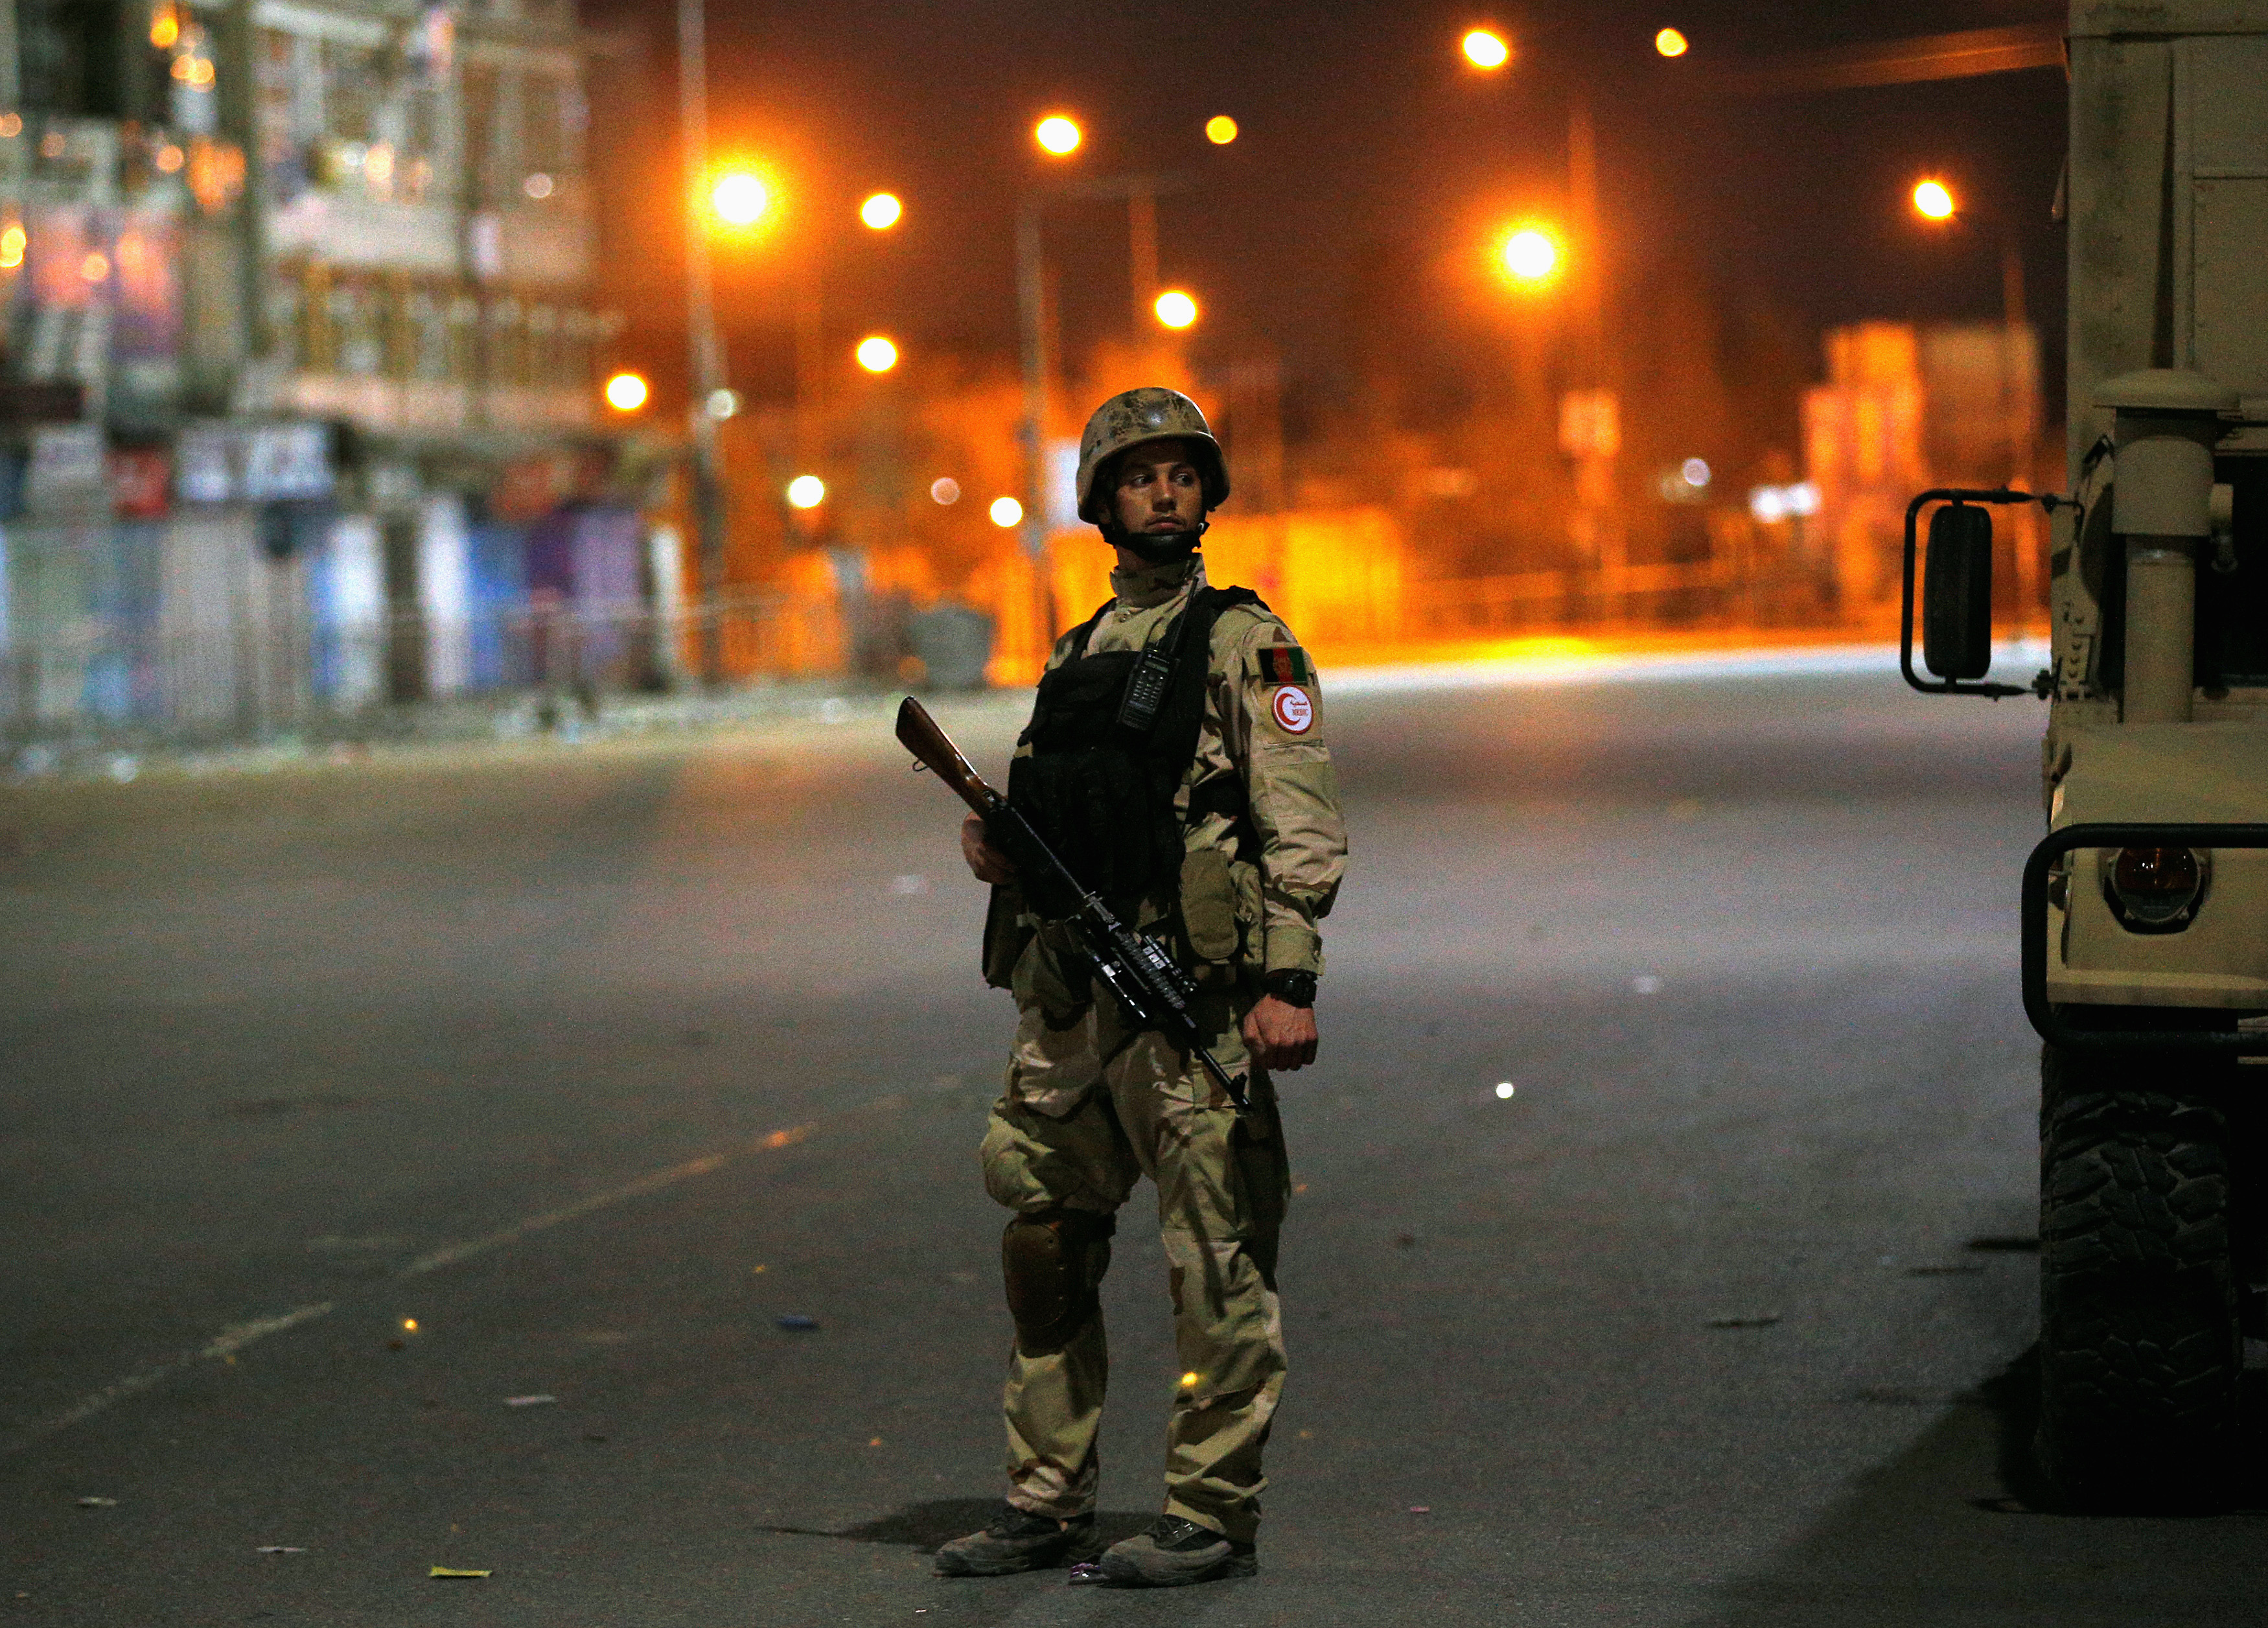 An Afghan soldier keeps watch near the Serena hotel, during an attack in Kabul, March 20, 2014. Taliban gunmen claimed nine lives. (Ahmad Masood—Reuters)